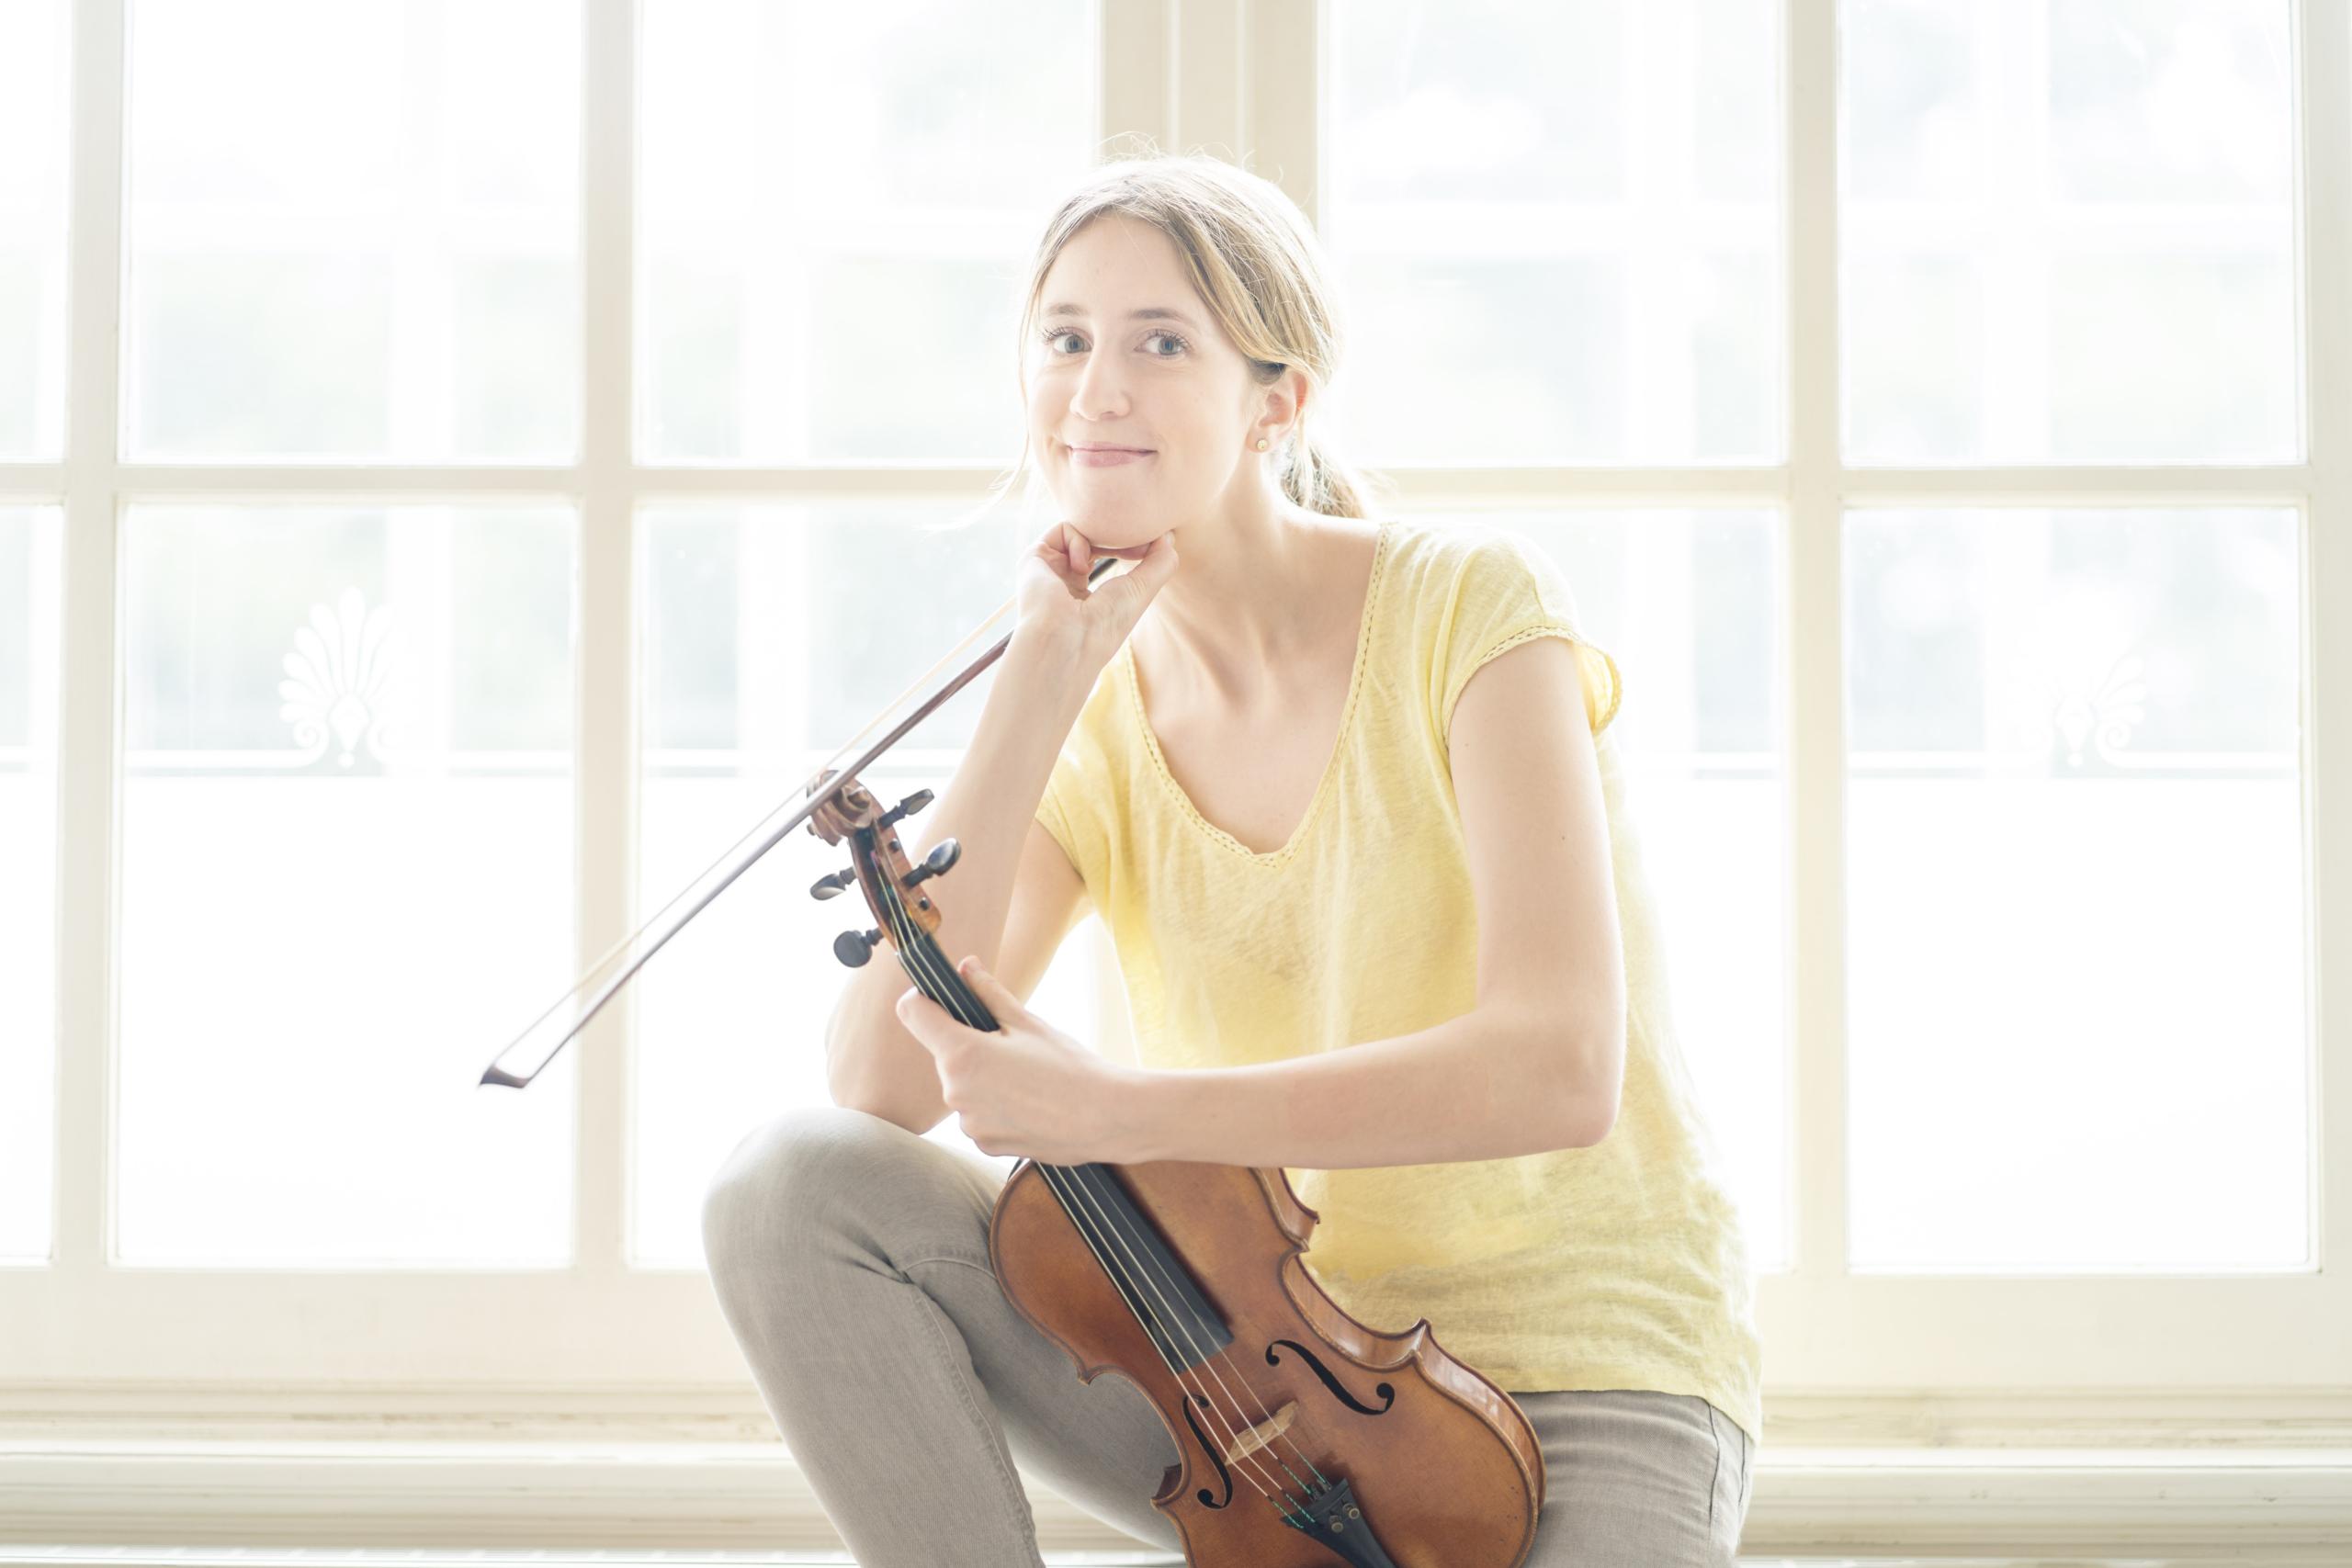 The violinist Vilde Frang is sitting on a windowsill and rests her elbow on her knee in a relaxed position. She holds the bow and the violin in one hand each.